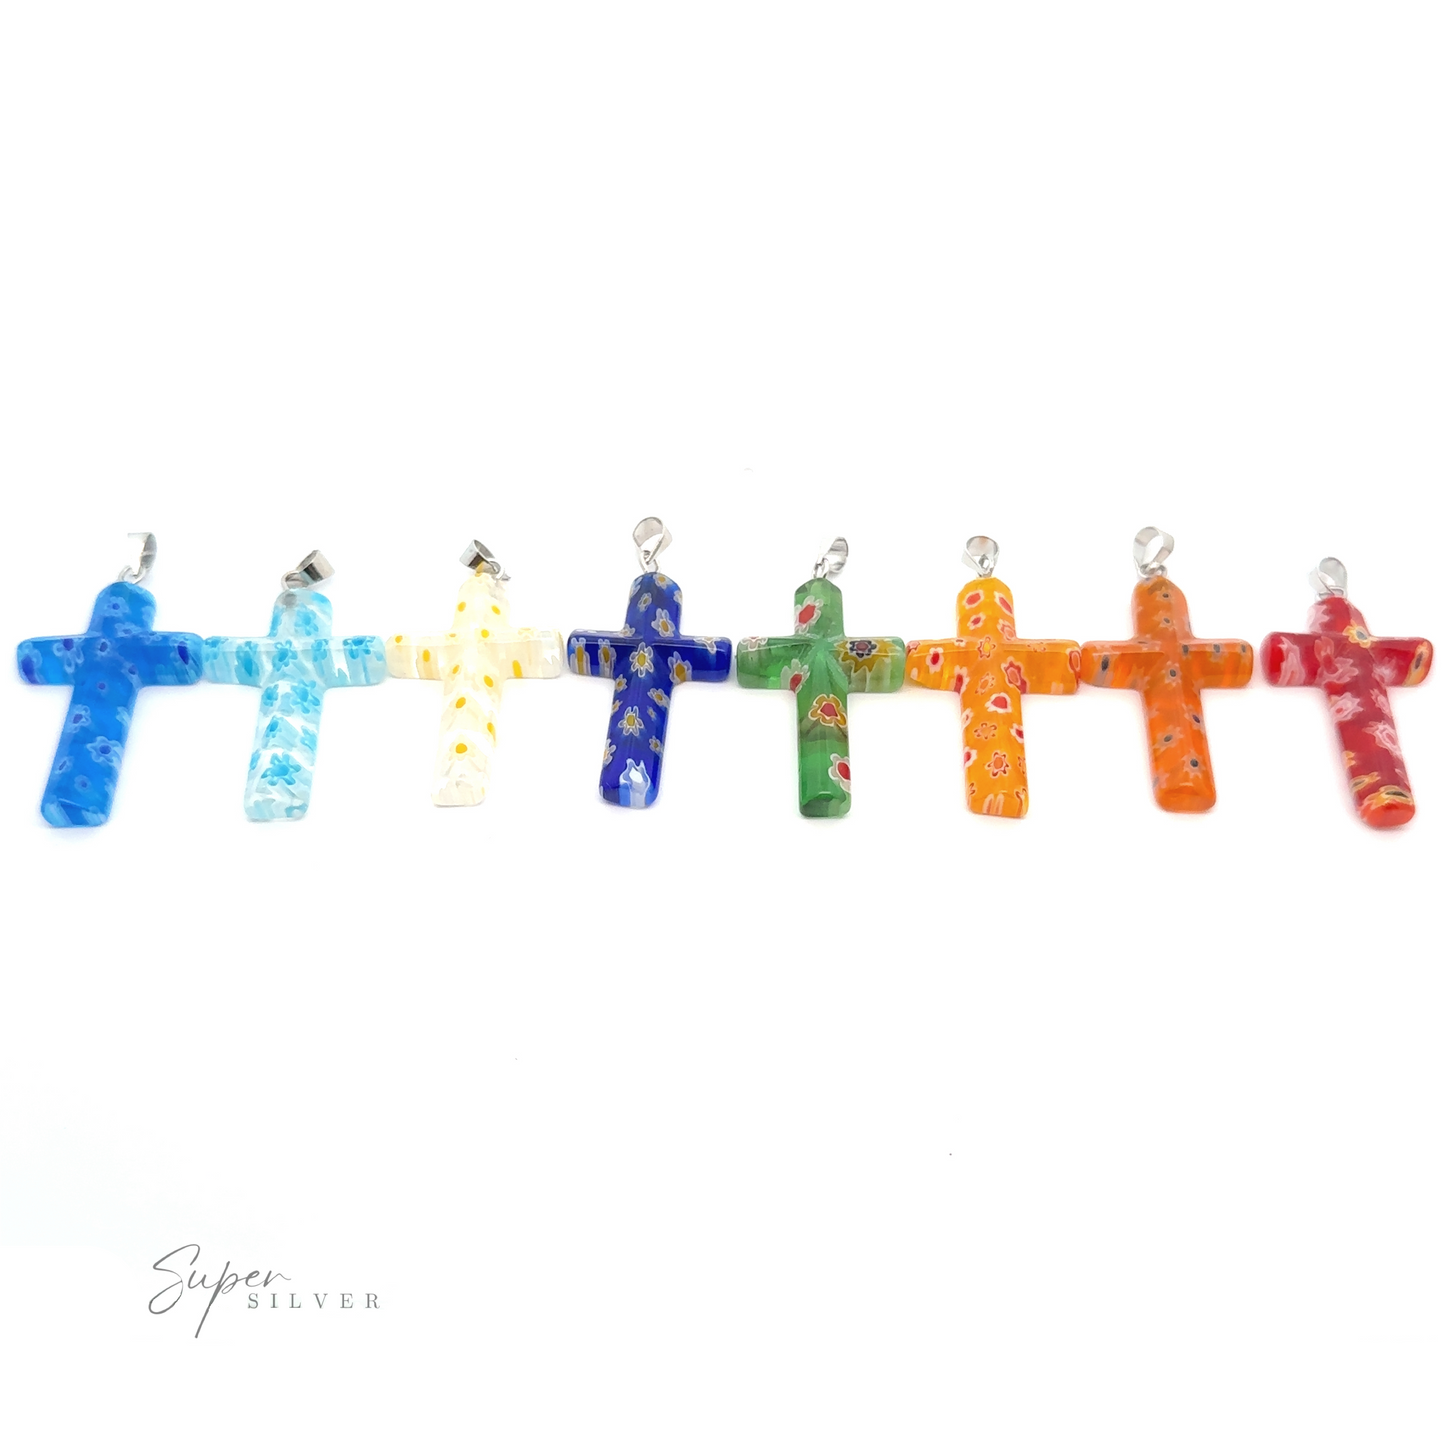 
                  
                    A row of colorful Cross Pendants with Flower Patterns, including mixed metals and translucent resin crosses with flower patterns, each featuring a silver loop on top, displayed against a white background.
                  
                